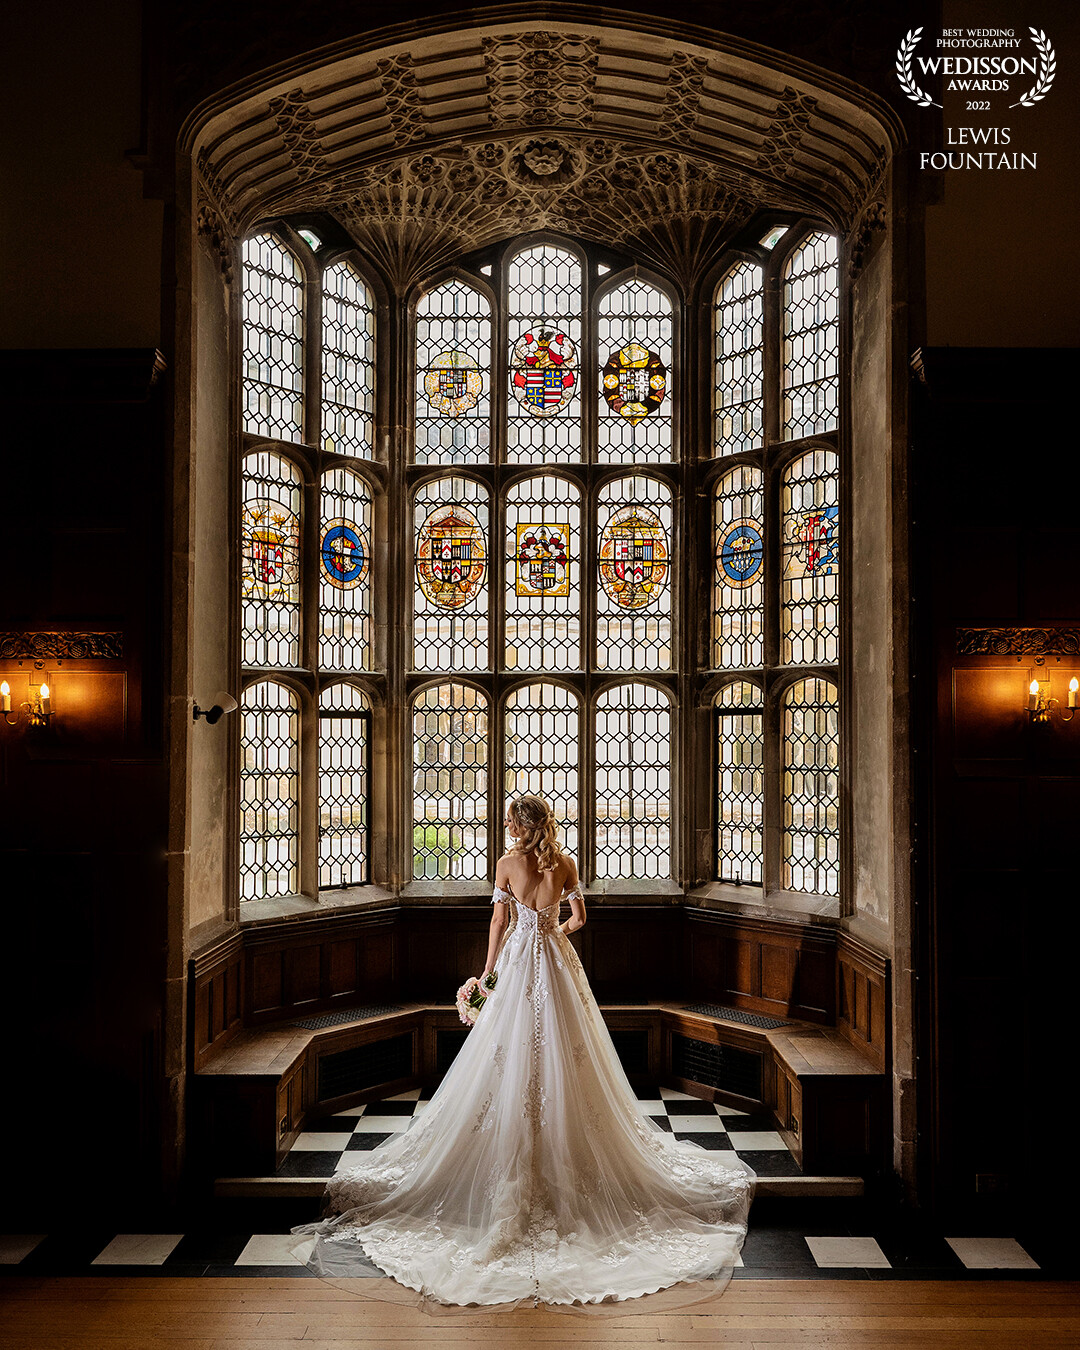 There are some awesome locations and photo opportunities within Hengrave Hall and we couldn’t resist capturing Rachael in here stunning wedding dress in this magnificent window.